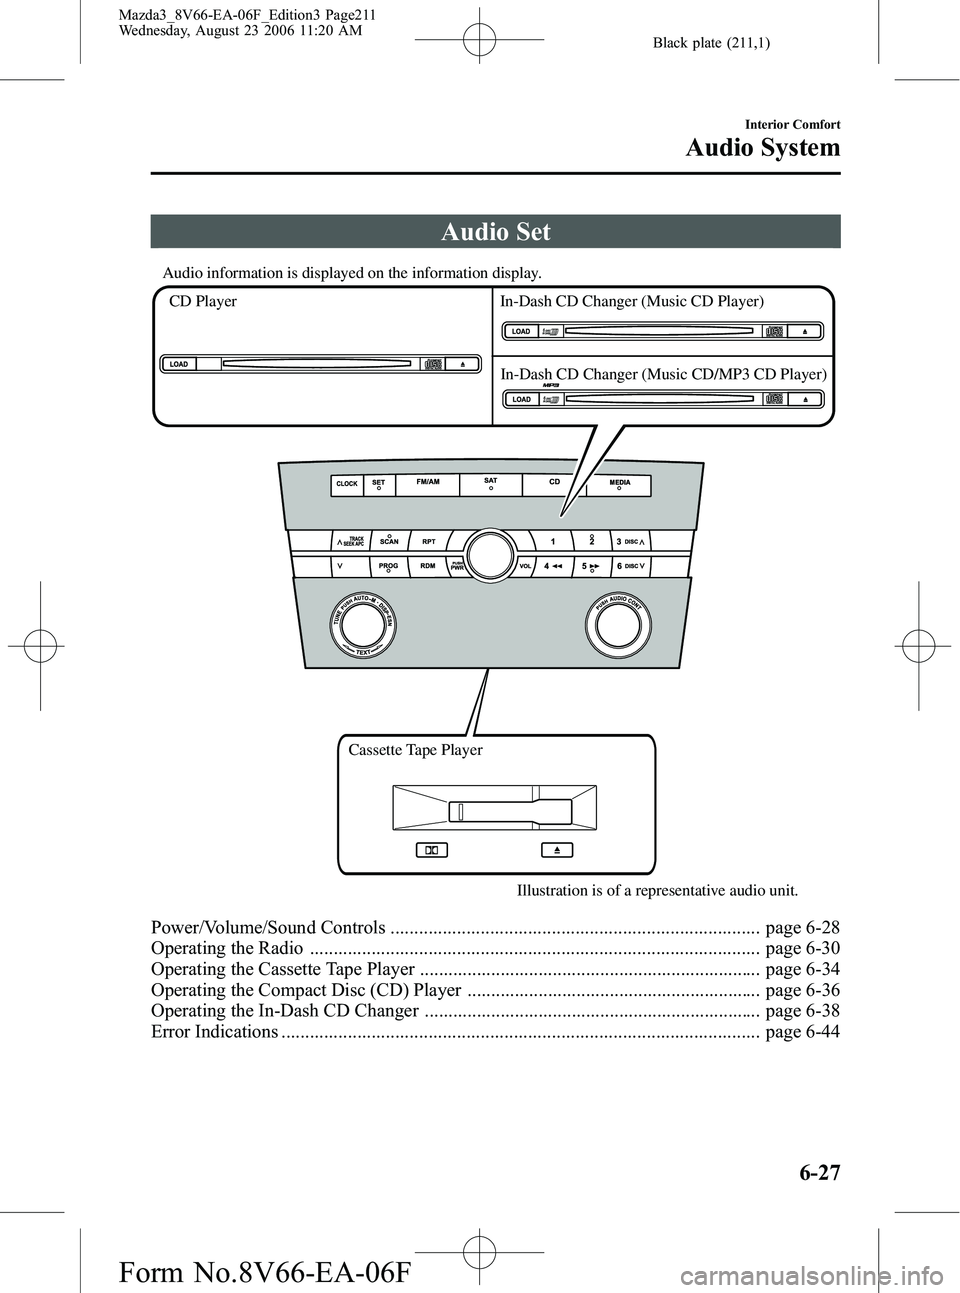 MAZDA MODEL 3 4-DOOR 2007  Owners Manual Black plate (211,1)
Audio Set
Audio information is displayed on the information display.CD Player  
Cassette Tape PlayerIllustration is of a representative audio unit.
In-Dash CD Changer (Music CD Pla